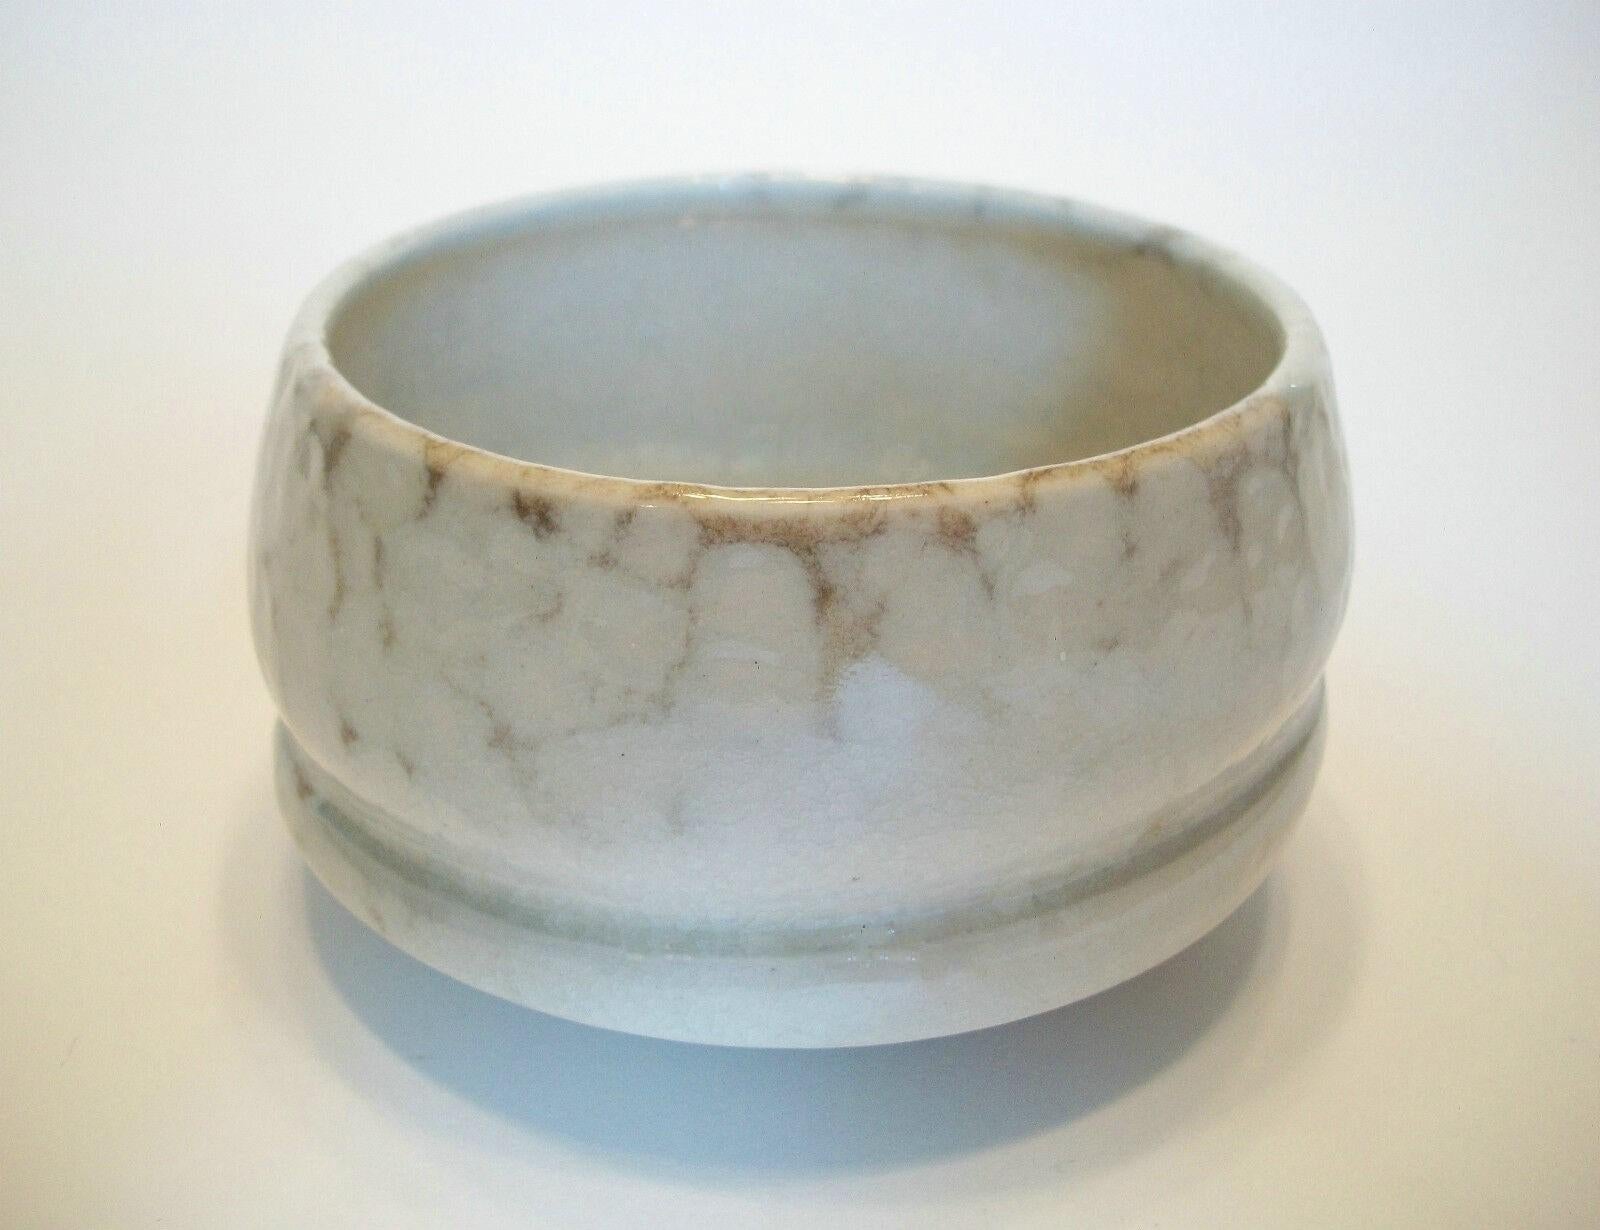 Paula Murray (b.1958) - Glazed studio pottery sculptural bowl - wheel thrown porcelain with manipulated body - signed and dated on the base - Canada - circa 1997.

Excellent condition - glaze crackle - no loss - no damage - no restoration - body &